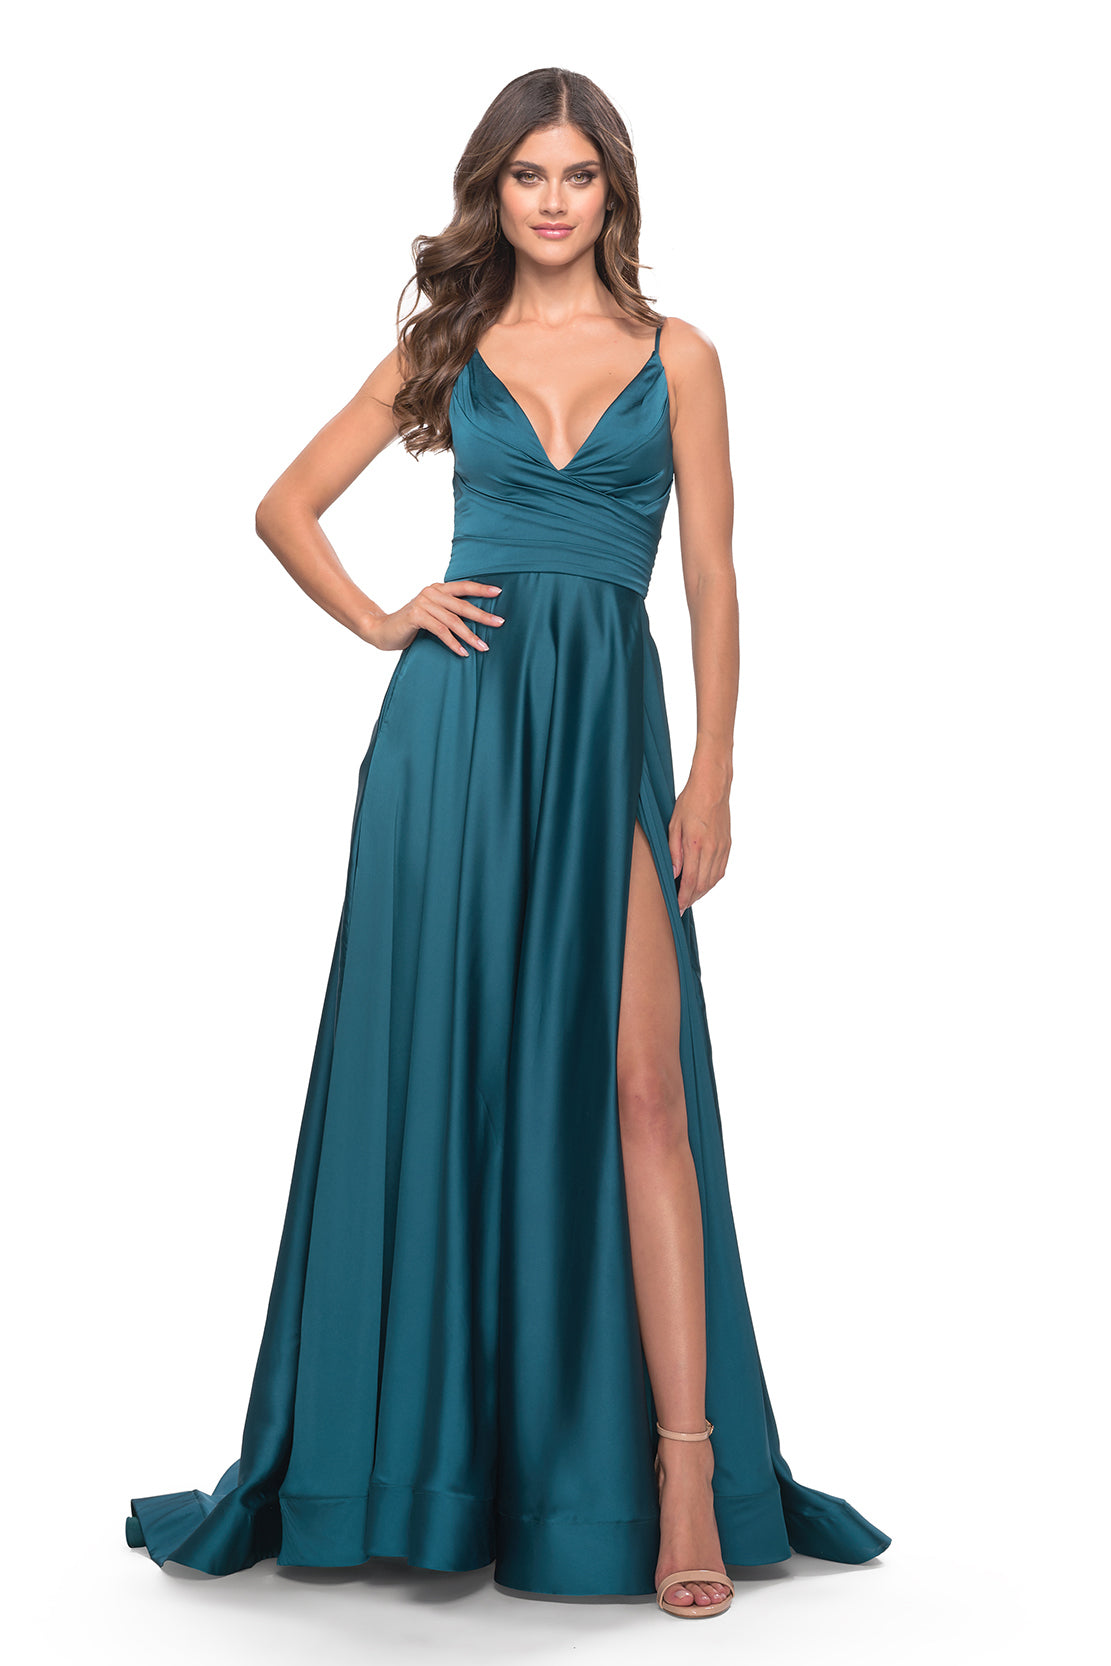 La Femme 31505 A-Line Satin Gown - A captivating A-line satin gown with a ruched bodice, V-neckline, and daring high slit, perfect for making a statement at prom.